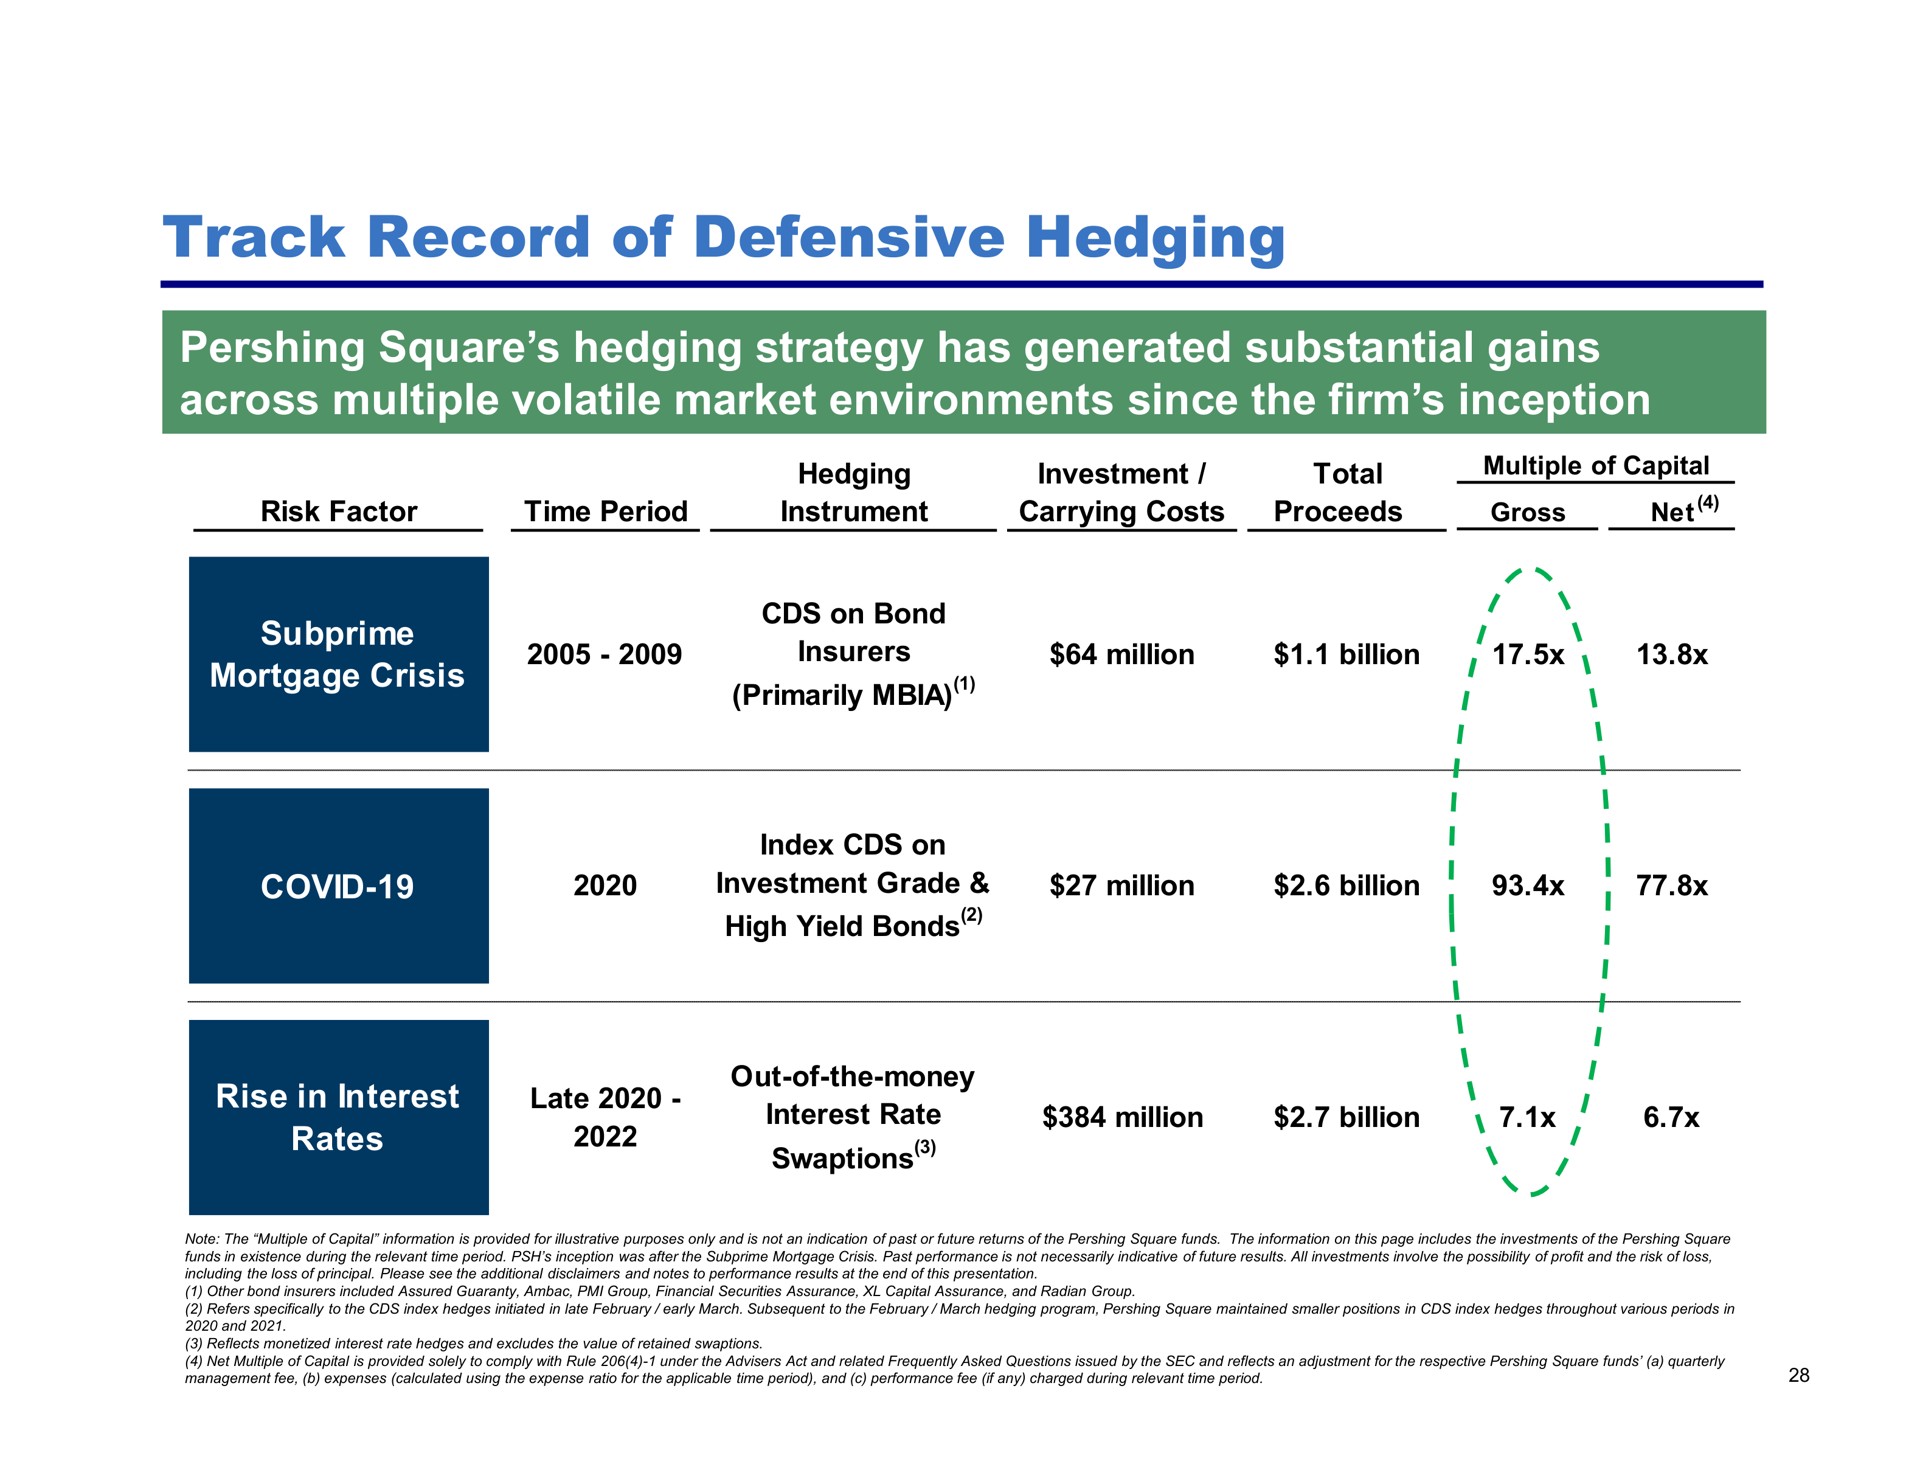 track record of defensive hedging square hedging strategy has generated substantial gains across multiple volatile market environments since the firm inception primarily index on i i i i rise in interest interest rate million billion | Pershing Square